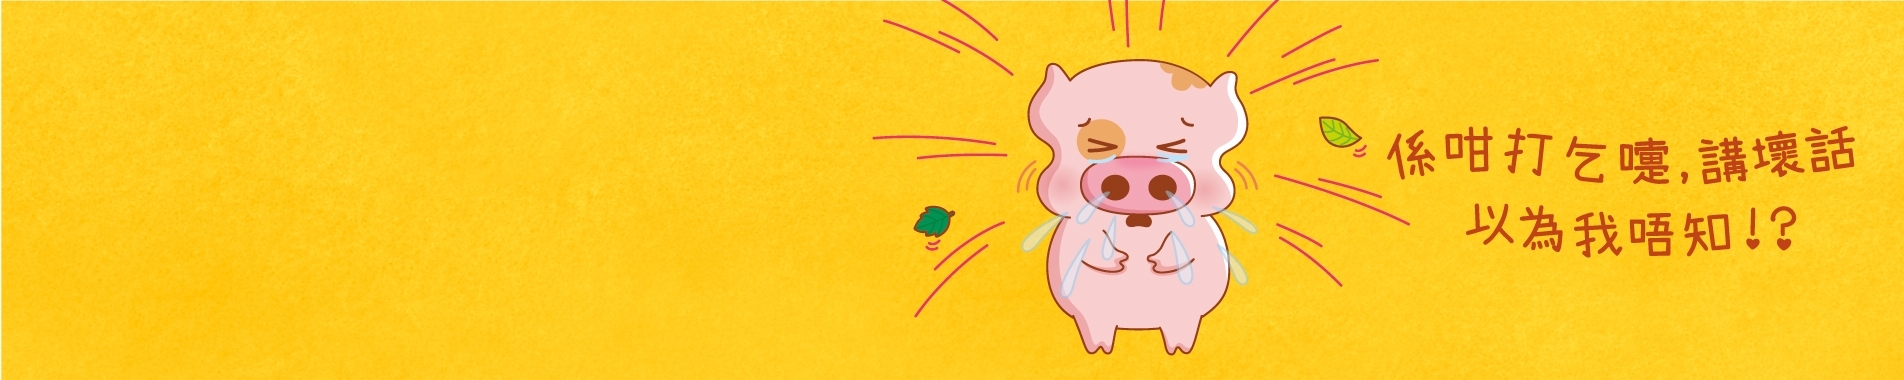 Avamys-x-McDull_What_is_banner-2022Jun02